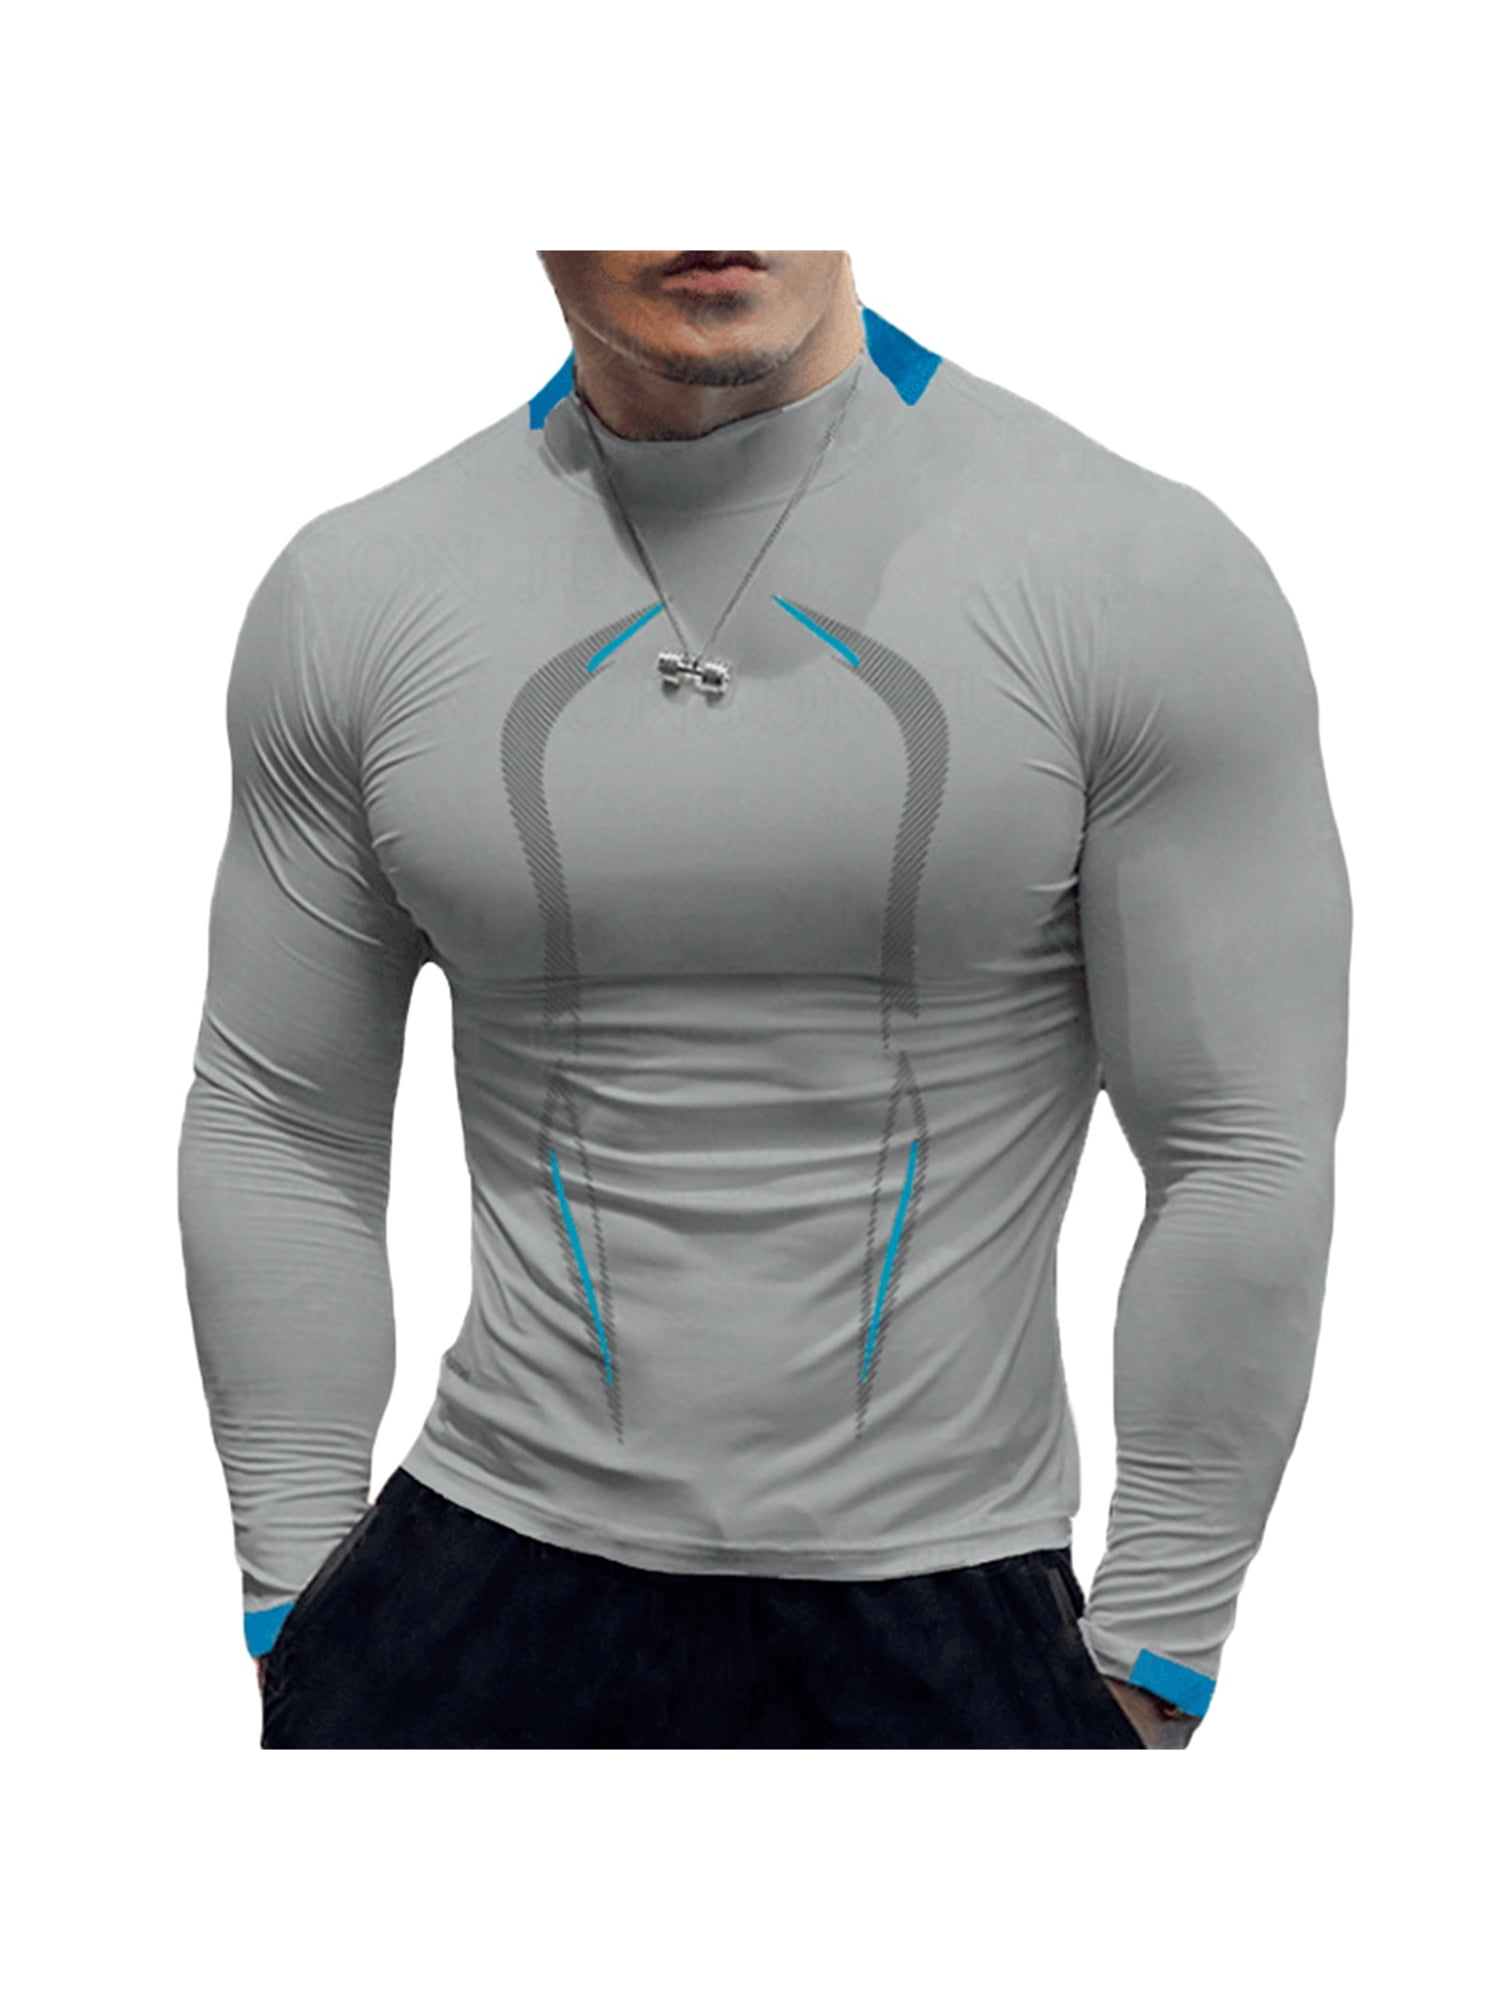 Mens Oversized Long Sleeve GYM Shirt Quick Dry Sport Tight Fit